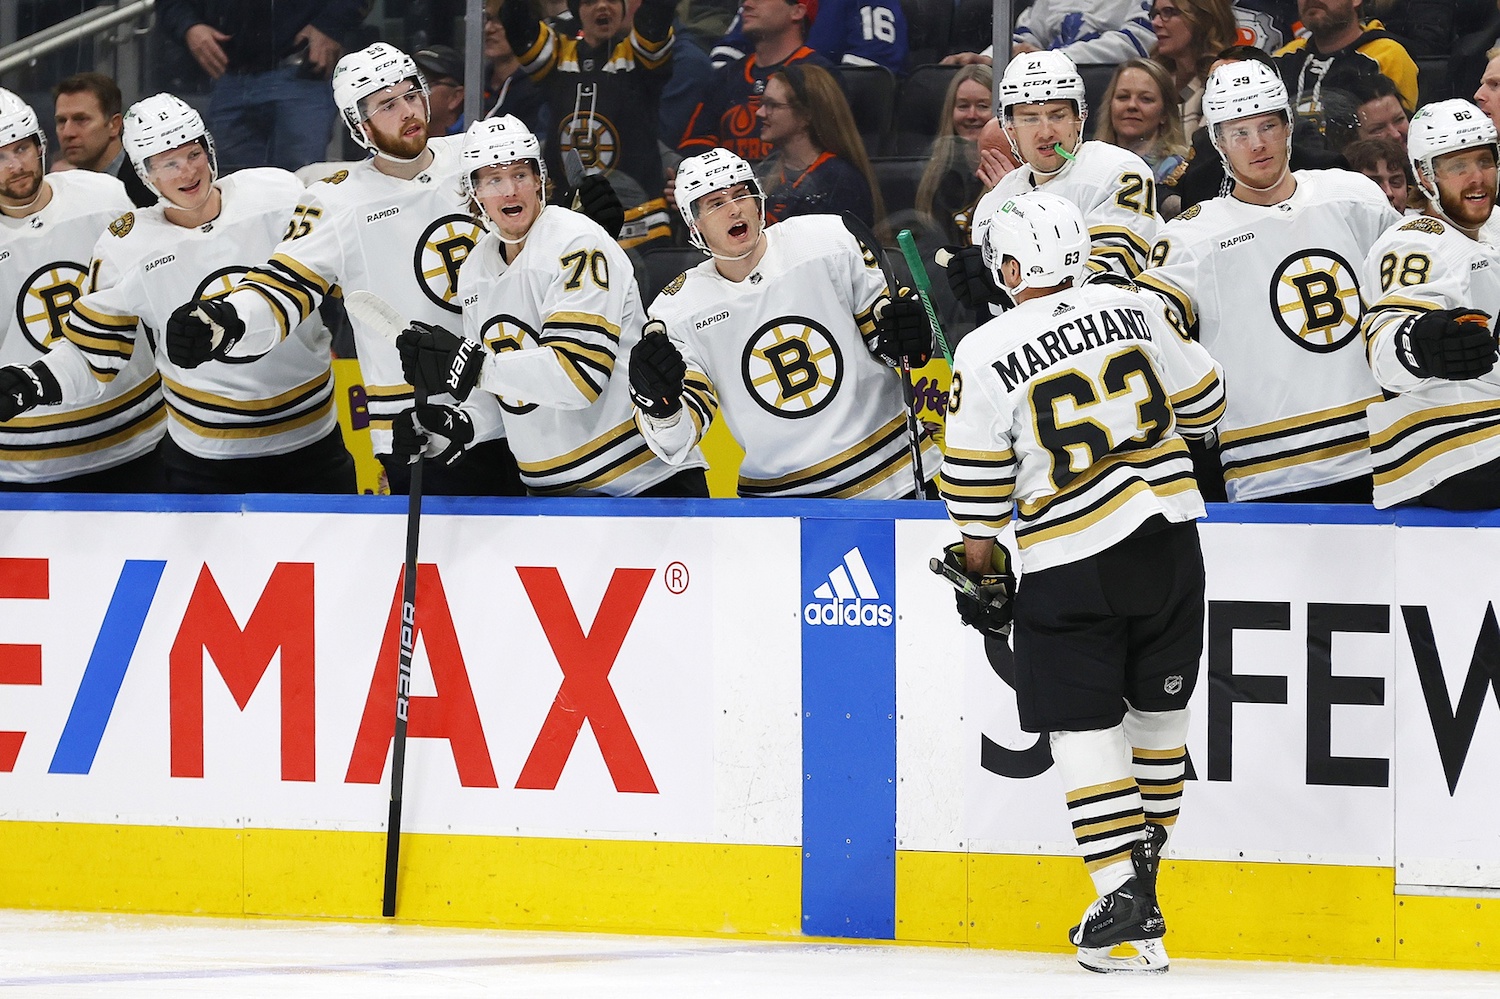 Feb 21, 2024; Edmonton, Alberta, CAN; The Boston Bruins celebrate a goal scored by forward Brad Marchand (63) during the second period against the Edmonton Oilers at Rogers Place. Mandatory Credit: Perry Nelson-USA TODAY Sports